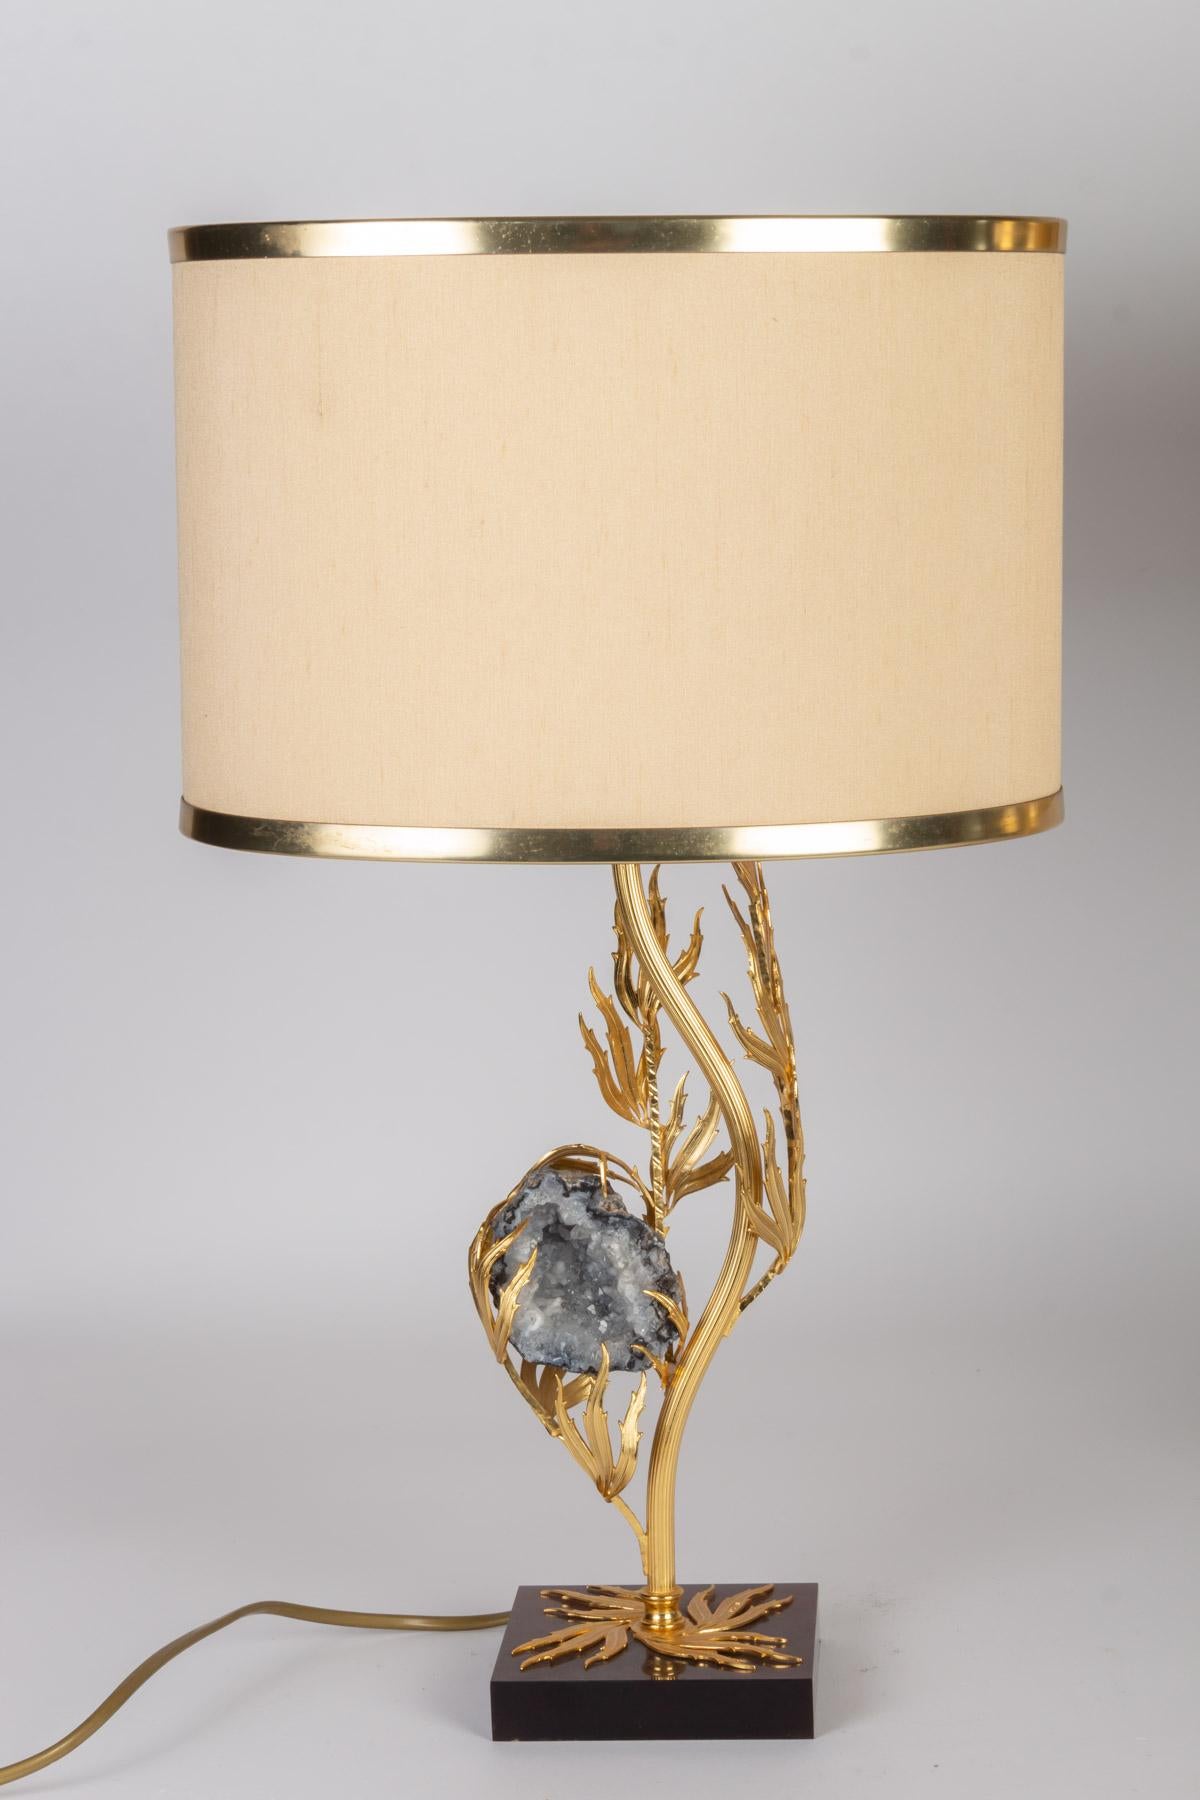 Superb pair of gilt brass and Celestite (also called Celestine) lamps attributed to Willy Daro, on brown lucite base France, 1960s-1970s
They are marked Lucifer on the base, and the flames ascending from the base up to the celestite which